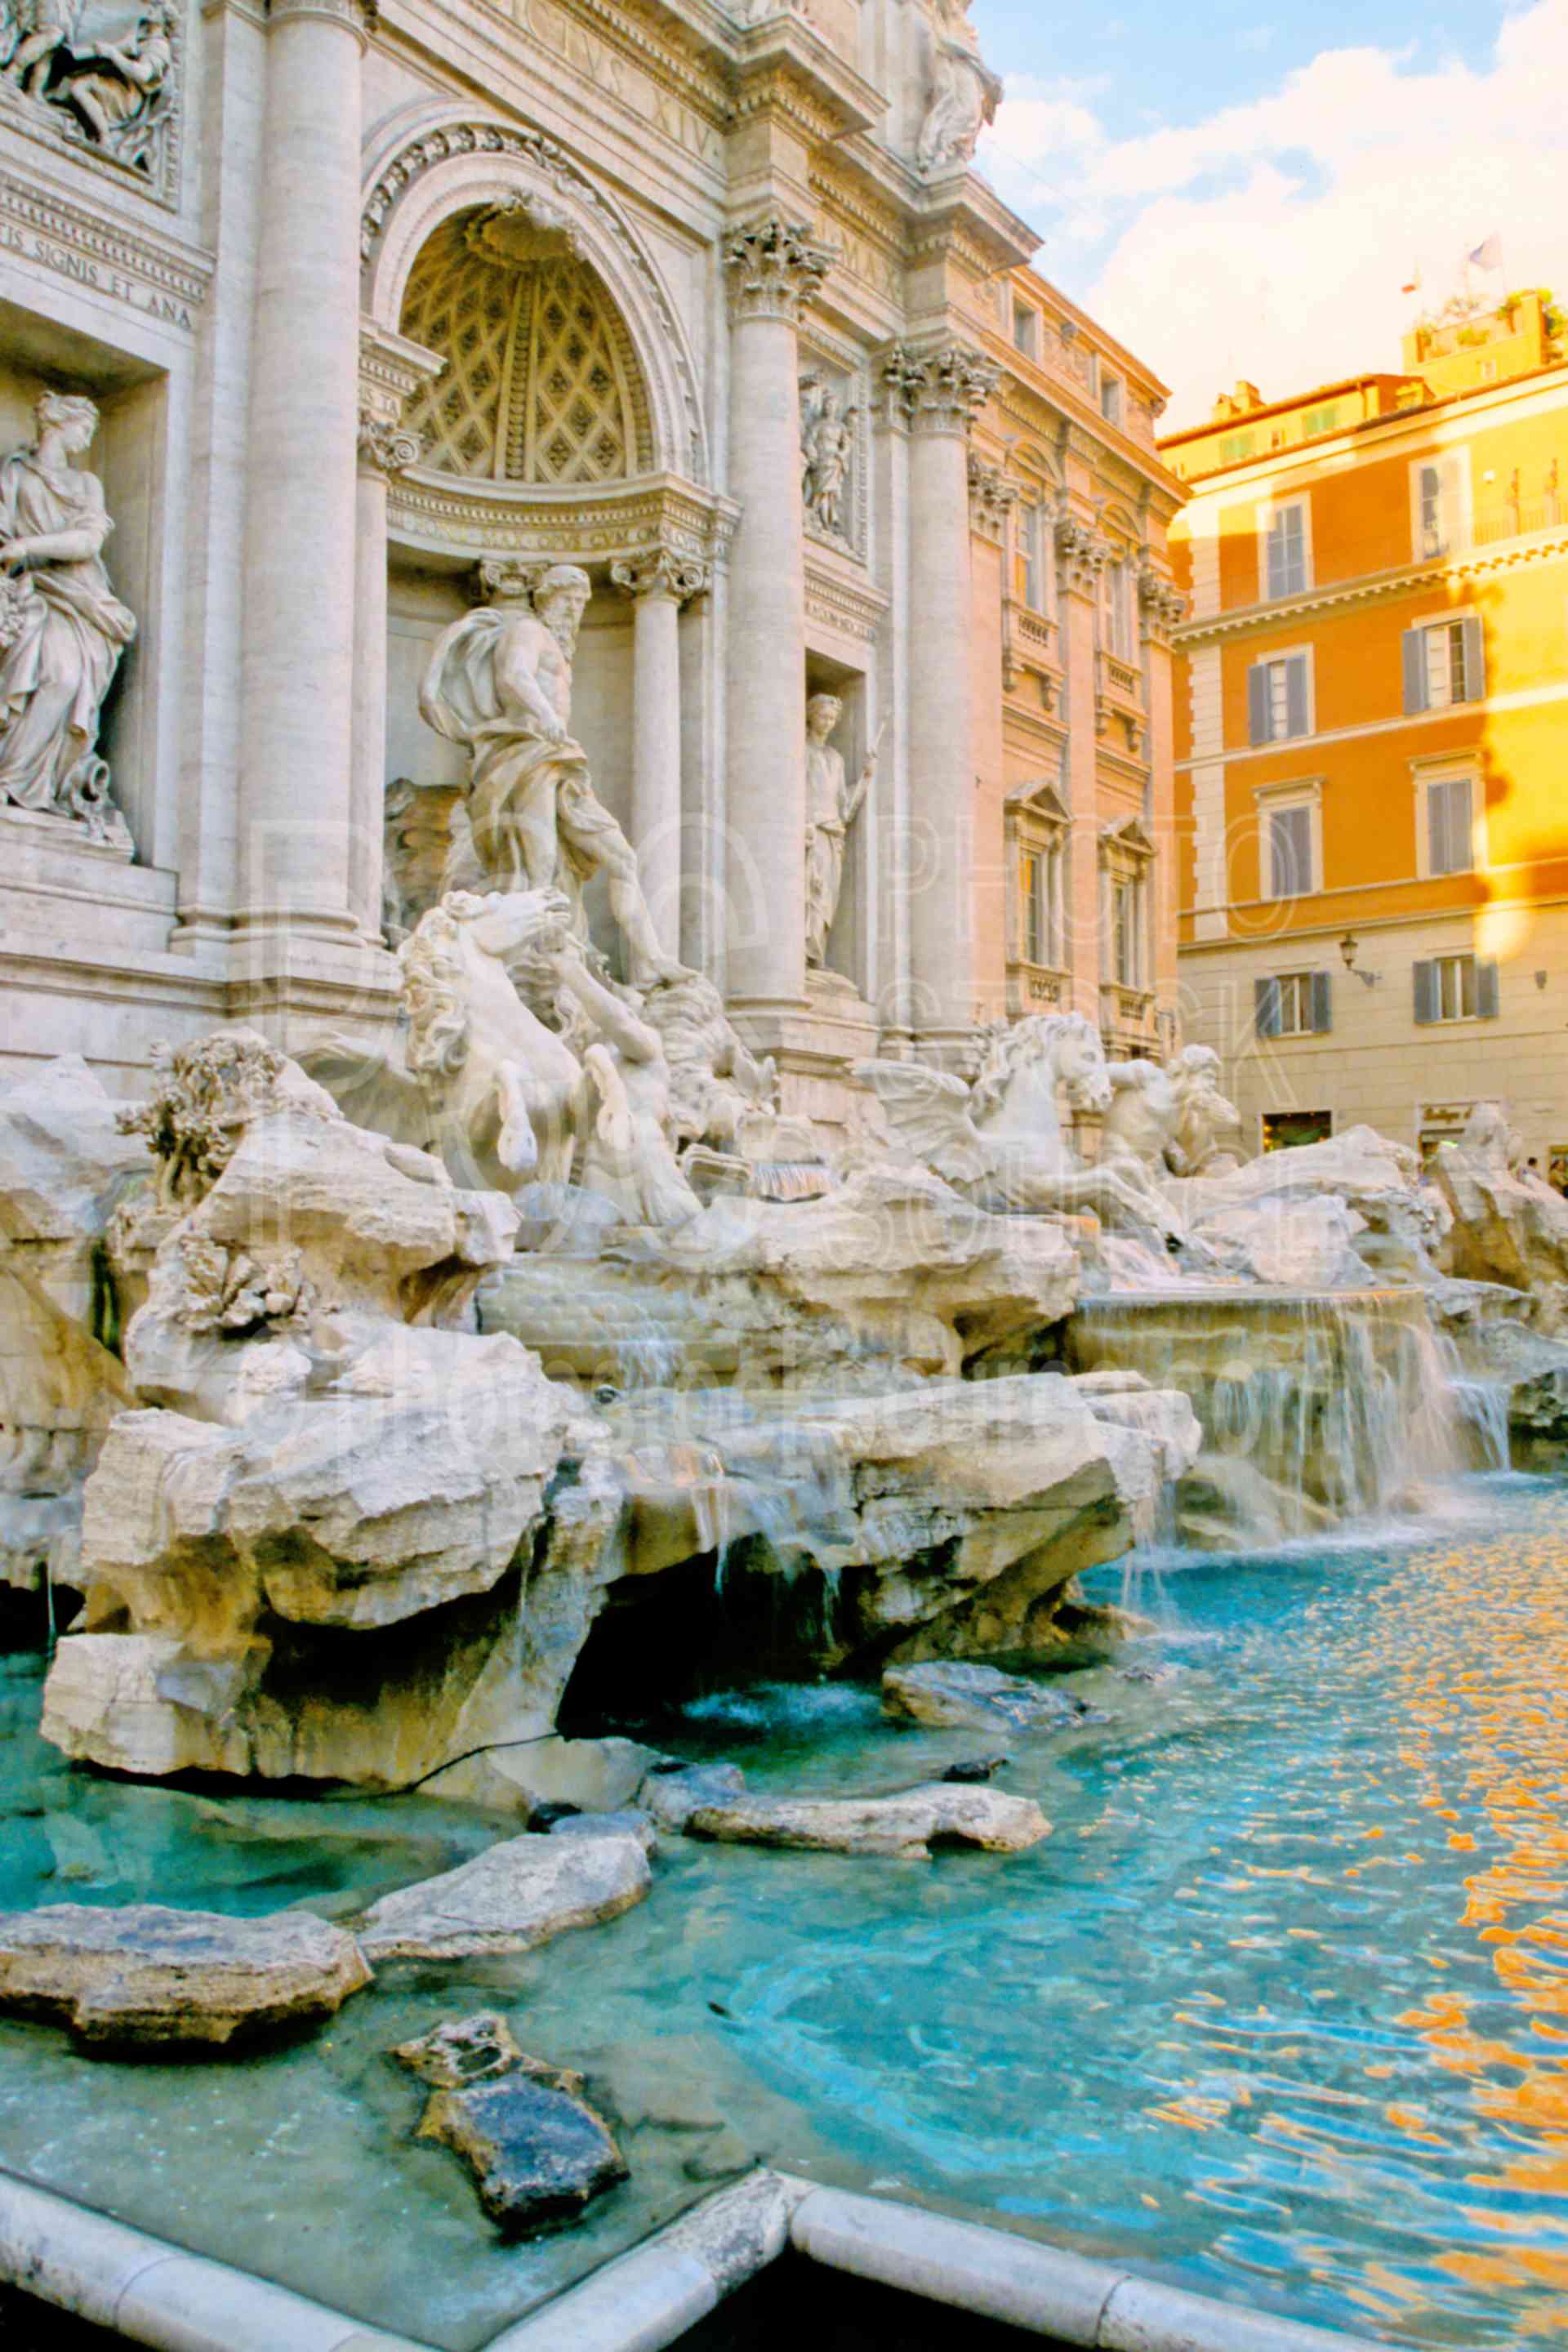 The Trevi Fountain,europe,fountain,steps,arts,sculptures